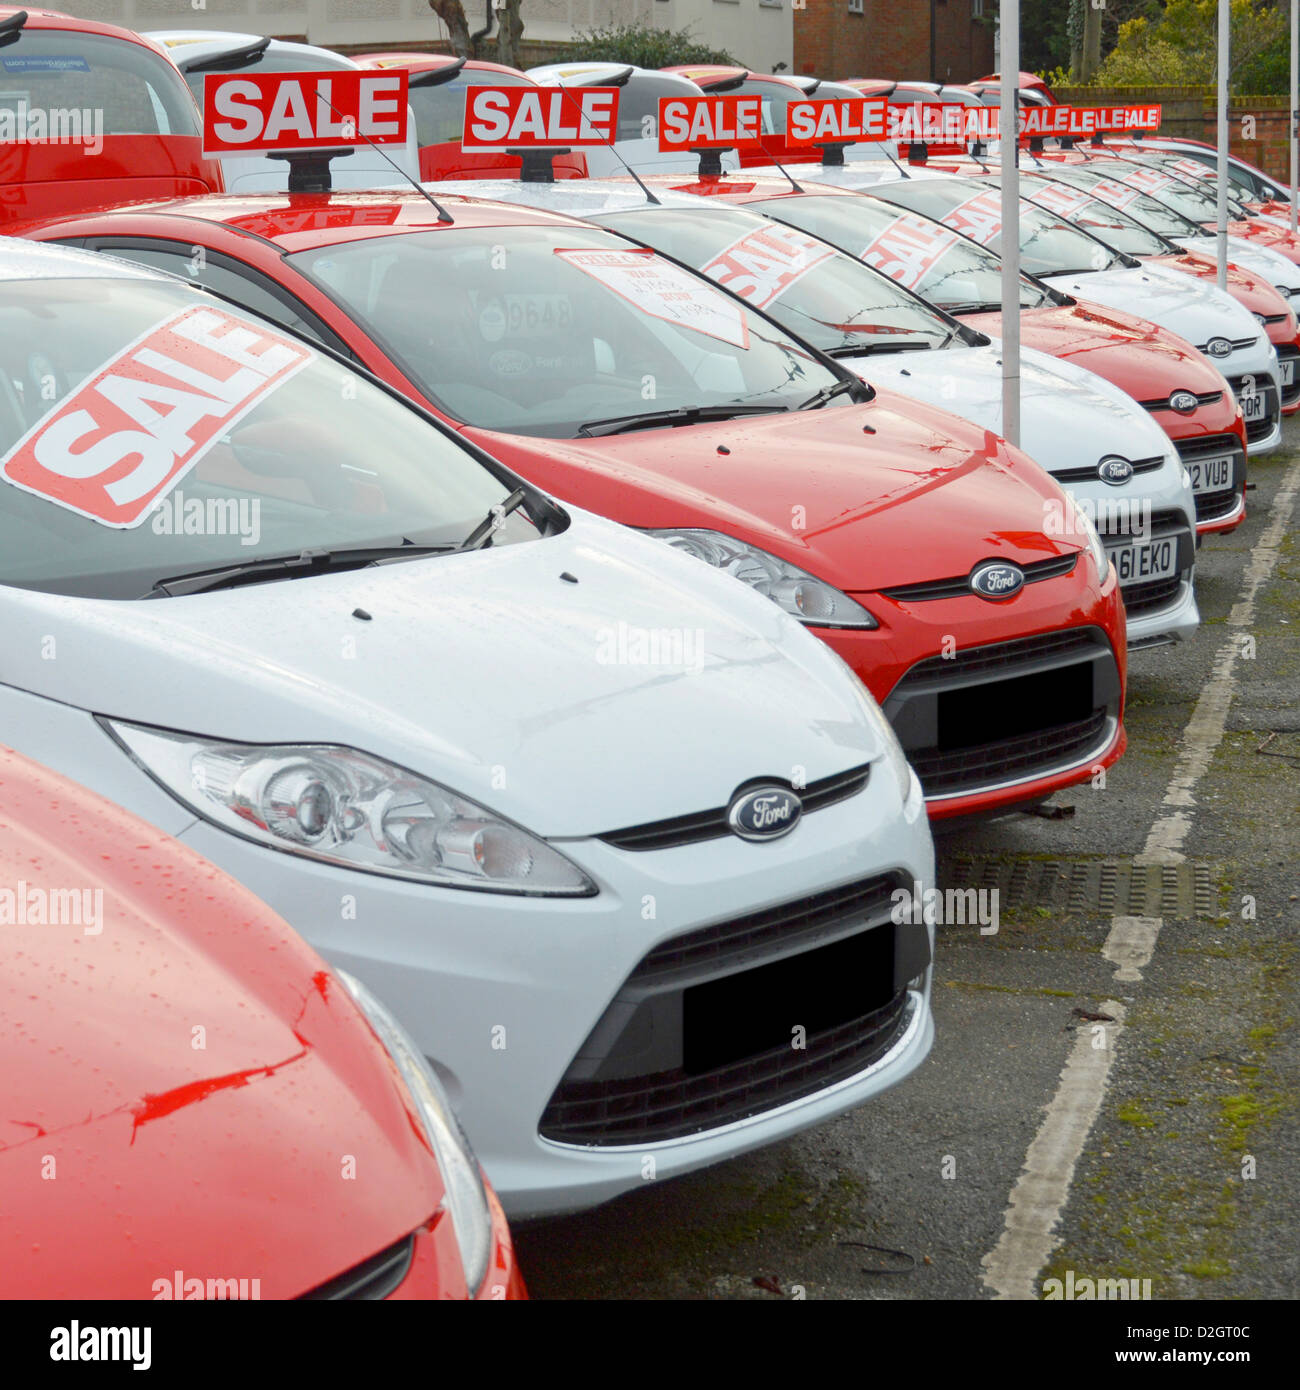 Sale of used Ford cars on car dealership pavement forecourt outside showroom arranged alternate red and white obscured number plates Essex England UK Stock Photo